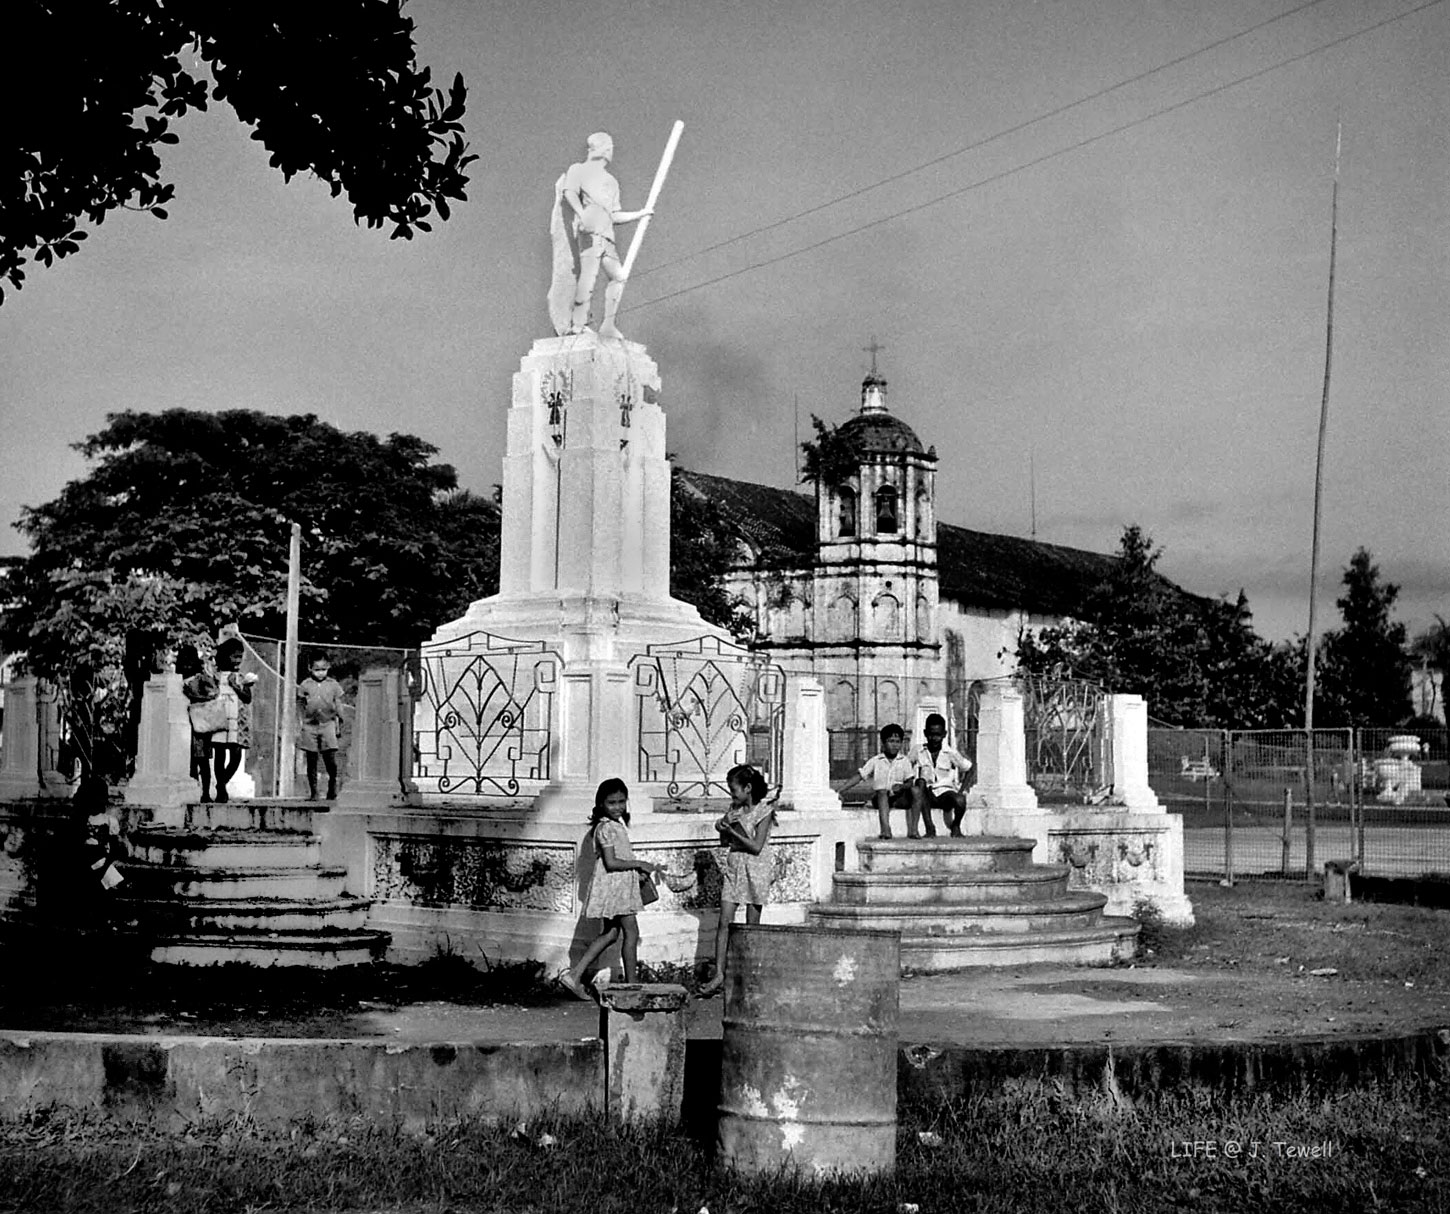 LAPULAPU. A photograph of the Lapulapu stature on October 10, 1949 by “Life” photographer Jack Birns. Beyond the statue is the old Opon church. (Photo from John Tewell’s Flickr account)